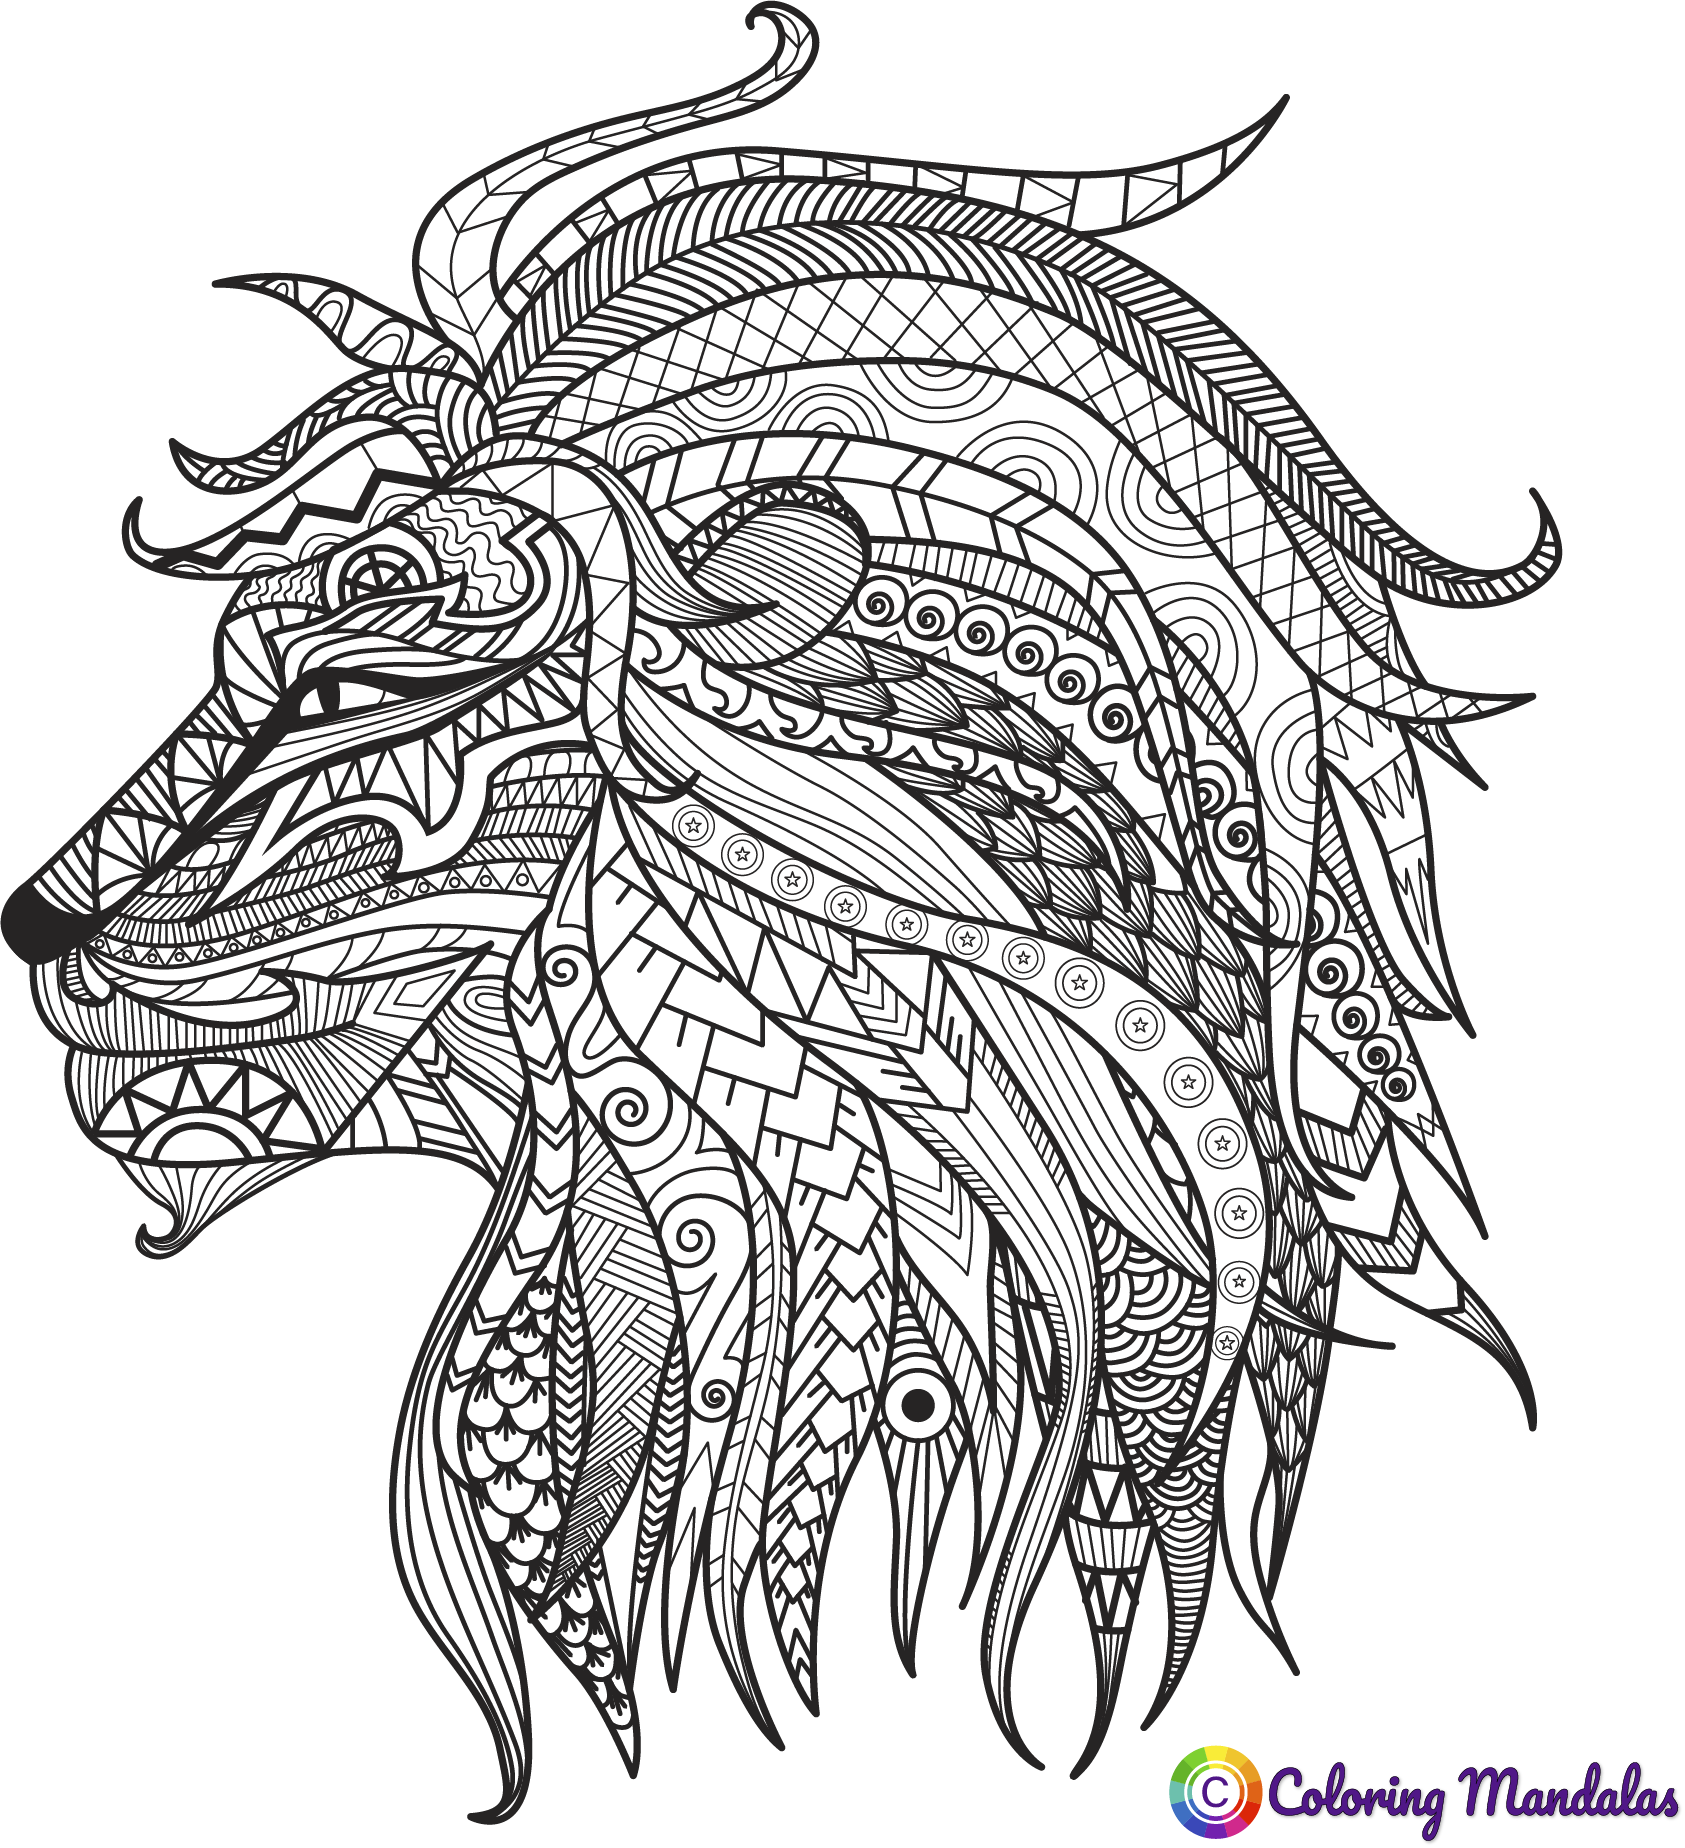 Lion for coloring